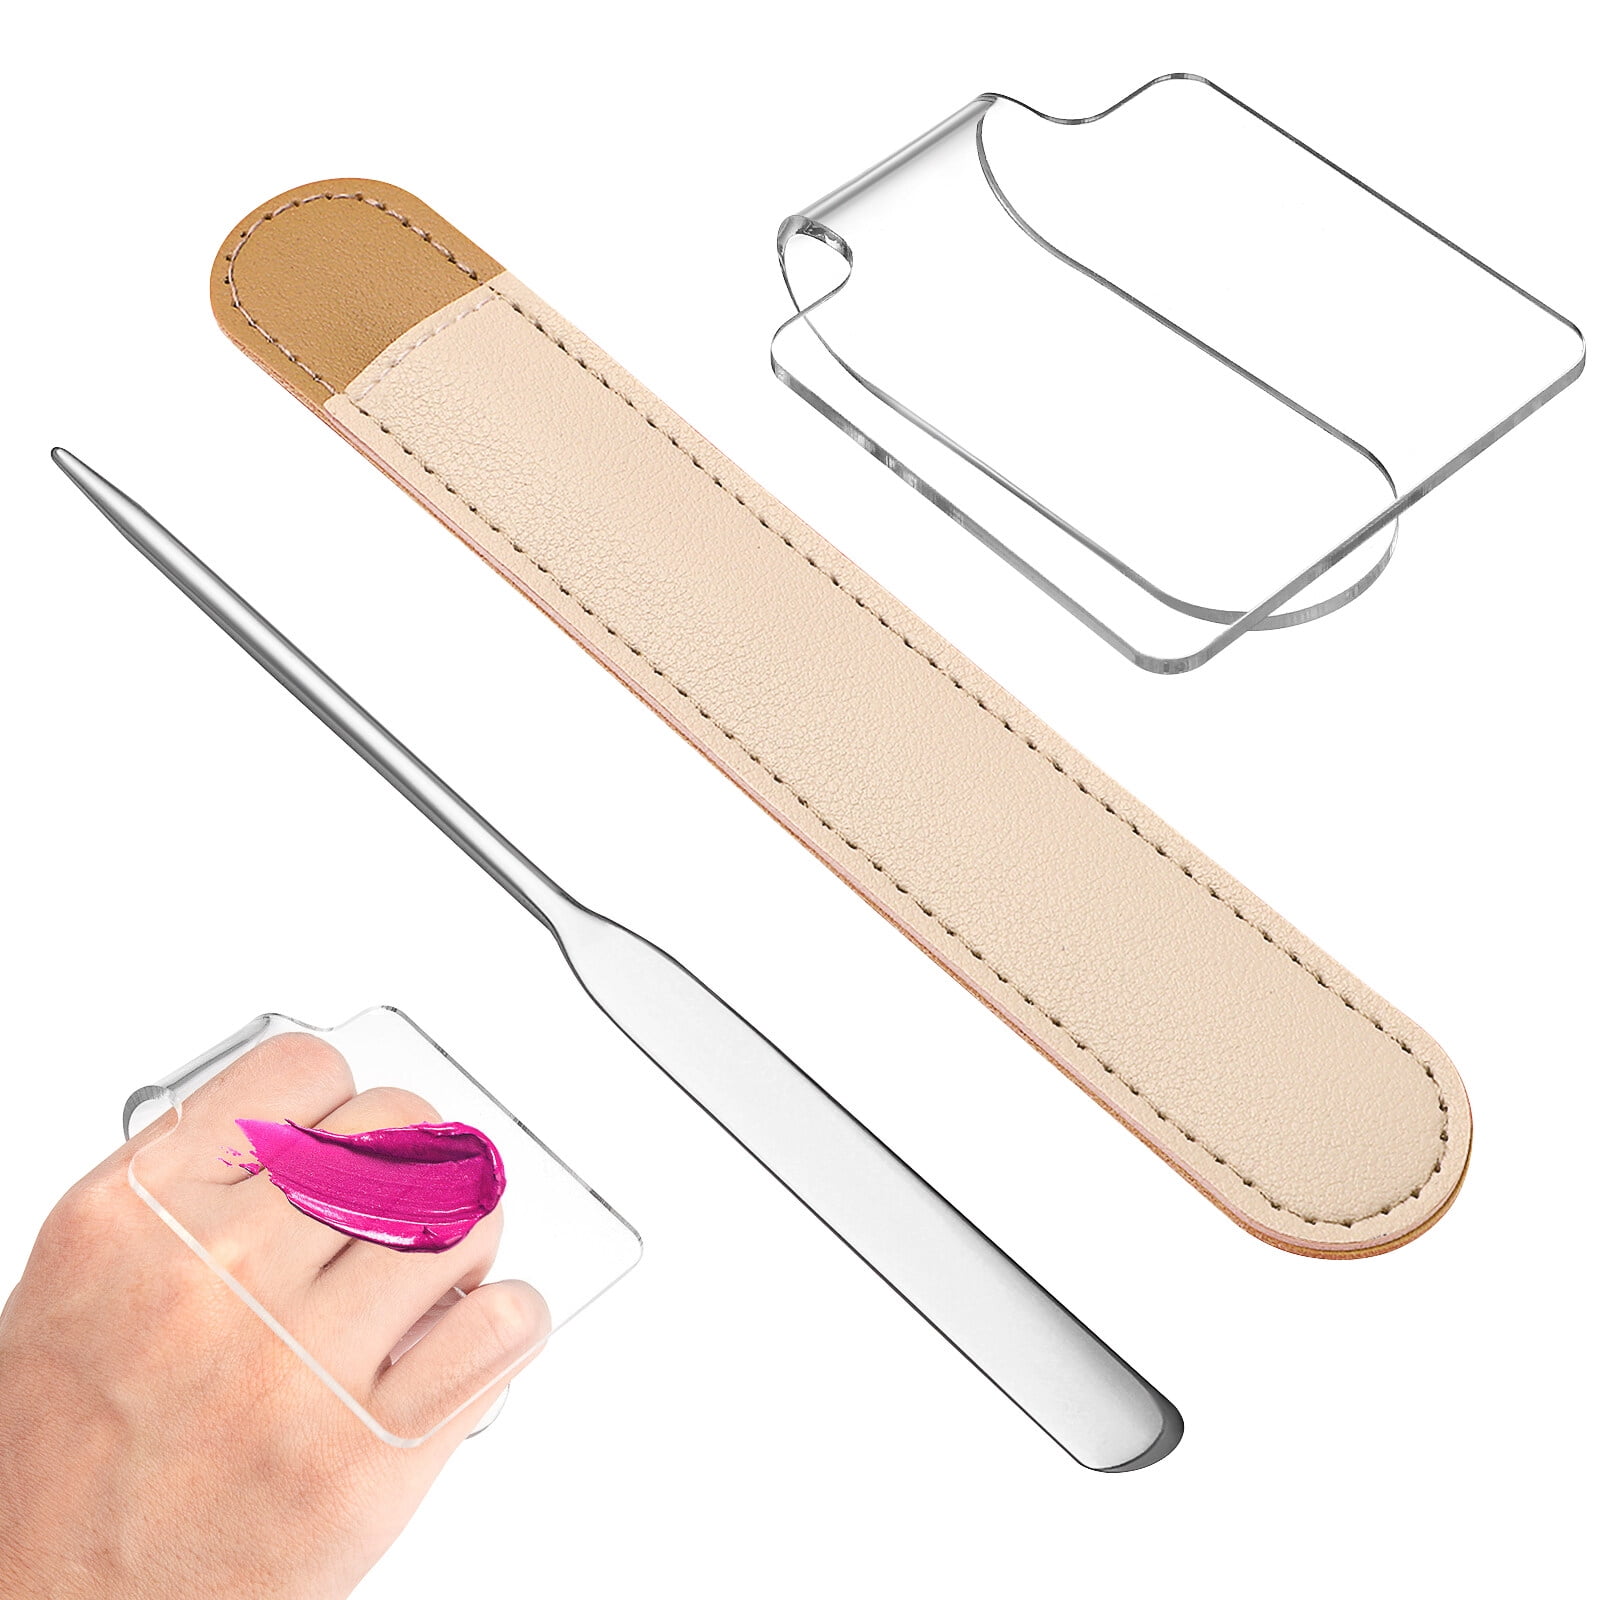 Makeup Palette with Spatula, Rotekt Clear Acrylic Makeup Nail Art Cosmetic  Mixing Palette & Stainless Spatula Tool Applicators Set,Nail Holder Display